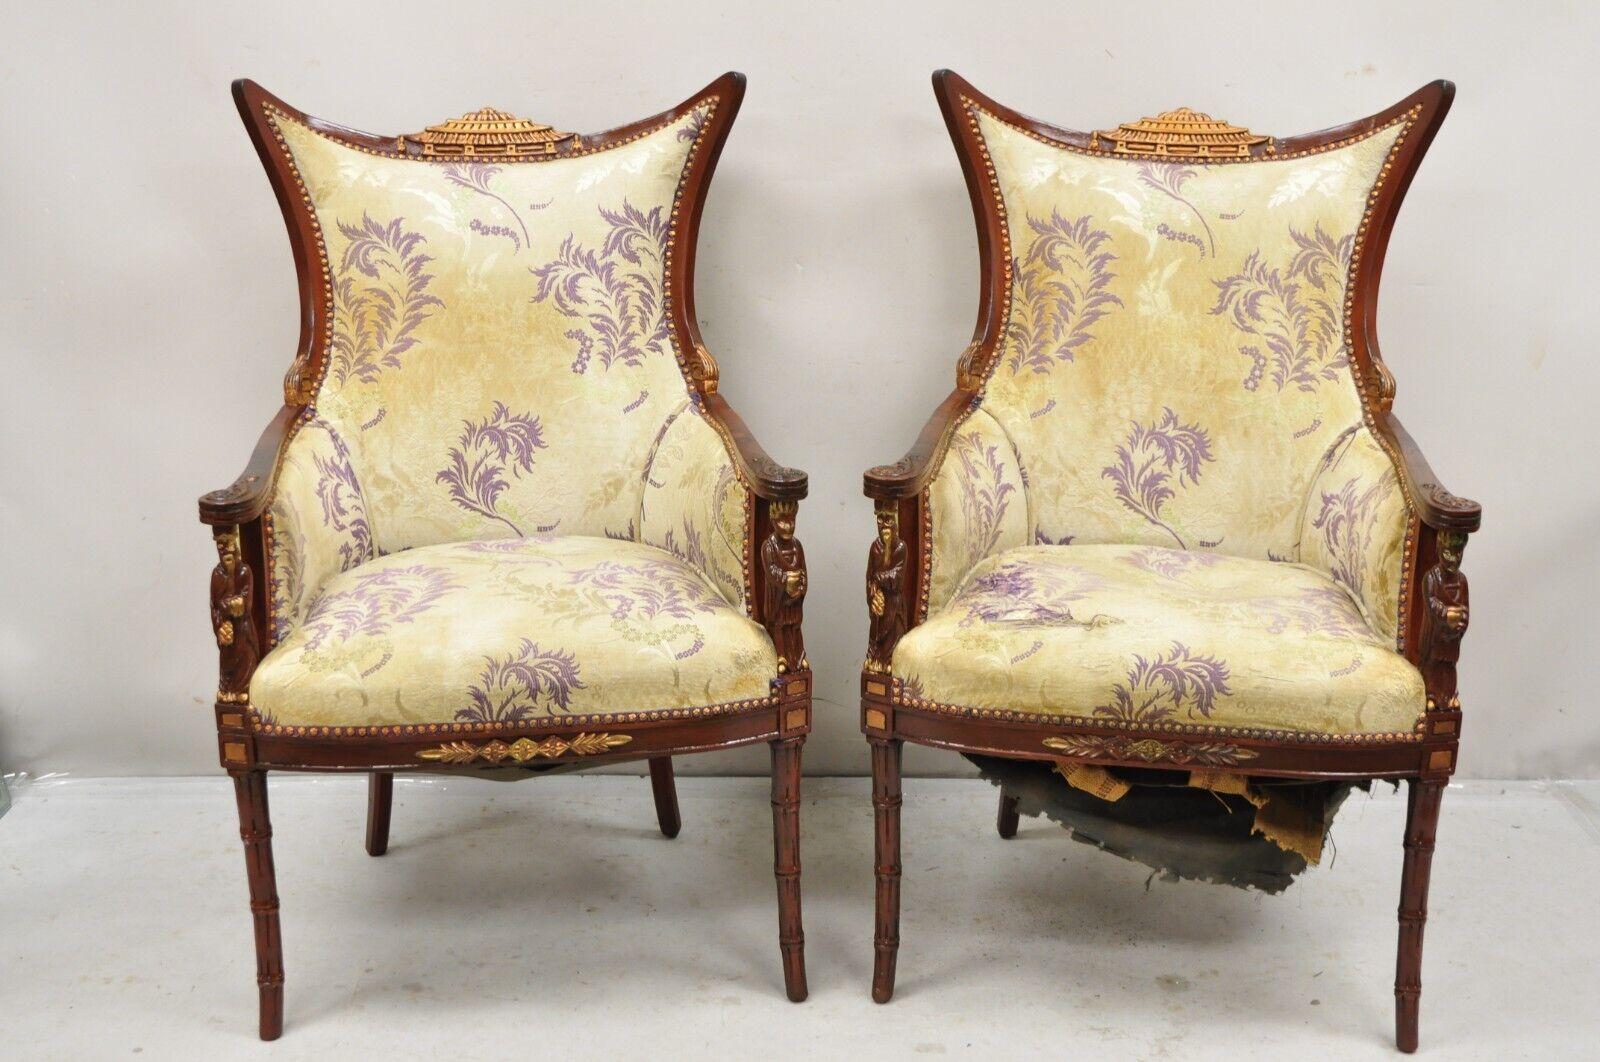 Vintage Chinoiserie Pagoda Figural Carved Mahogany Fireside Parlor Lounge Chairs - Pair. Circa Early to Mid 20th Century. 43